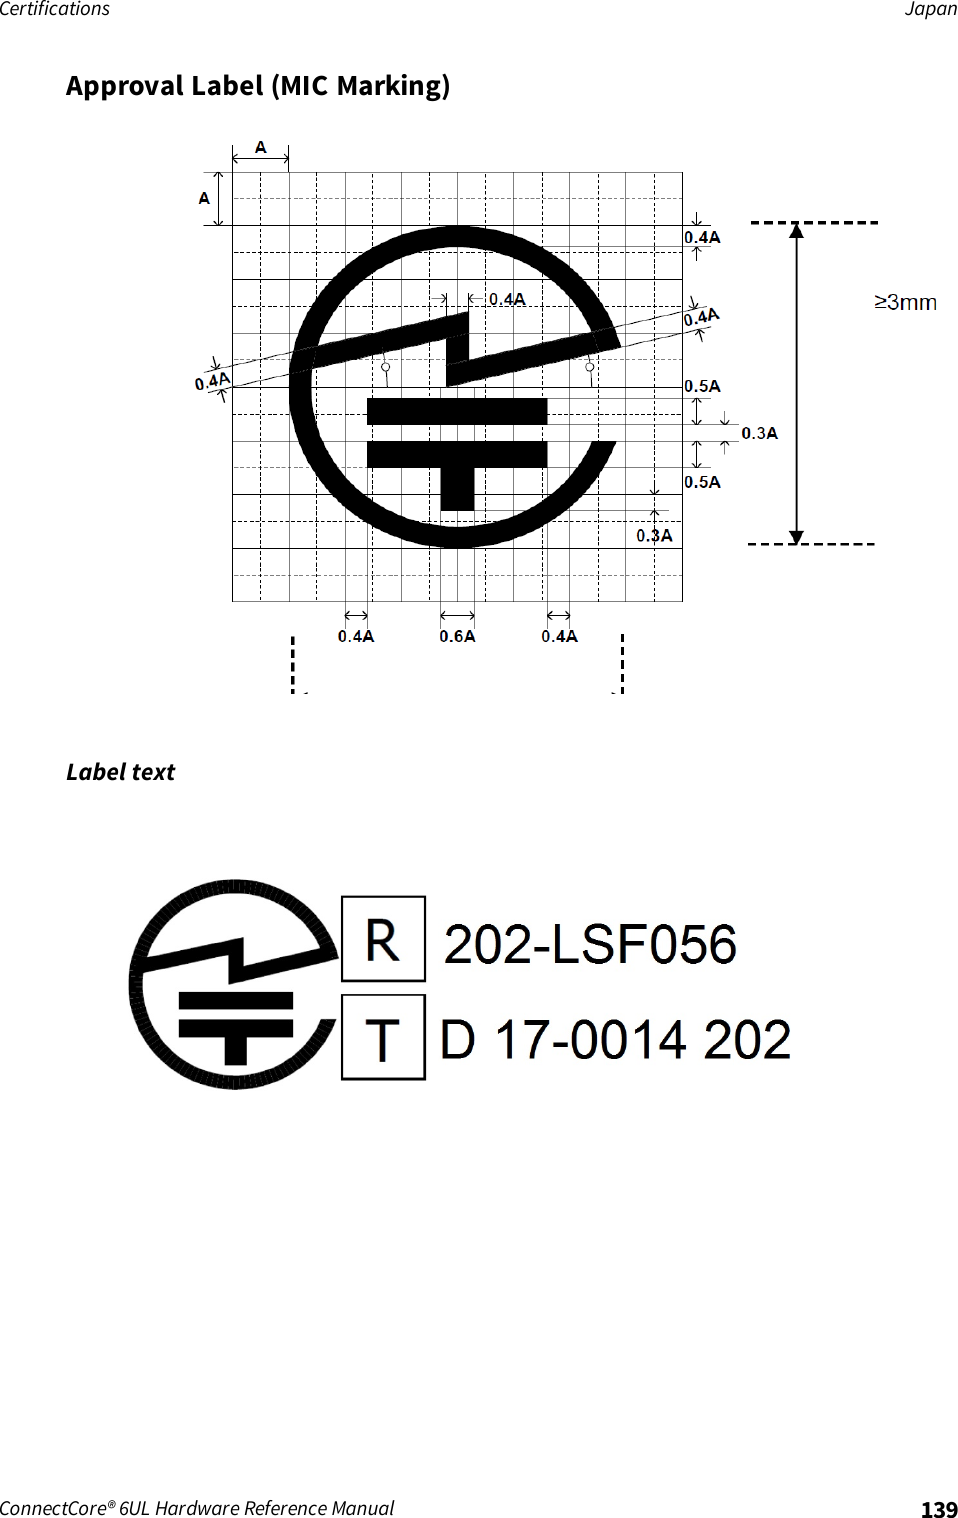 Certifications JapanConnectCore® 6UL Hardware Reference Manual 139Approval Label (MIC Marking)Label text